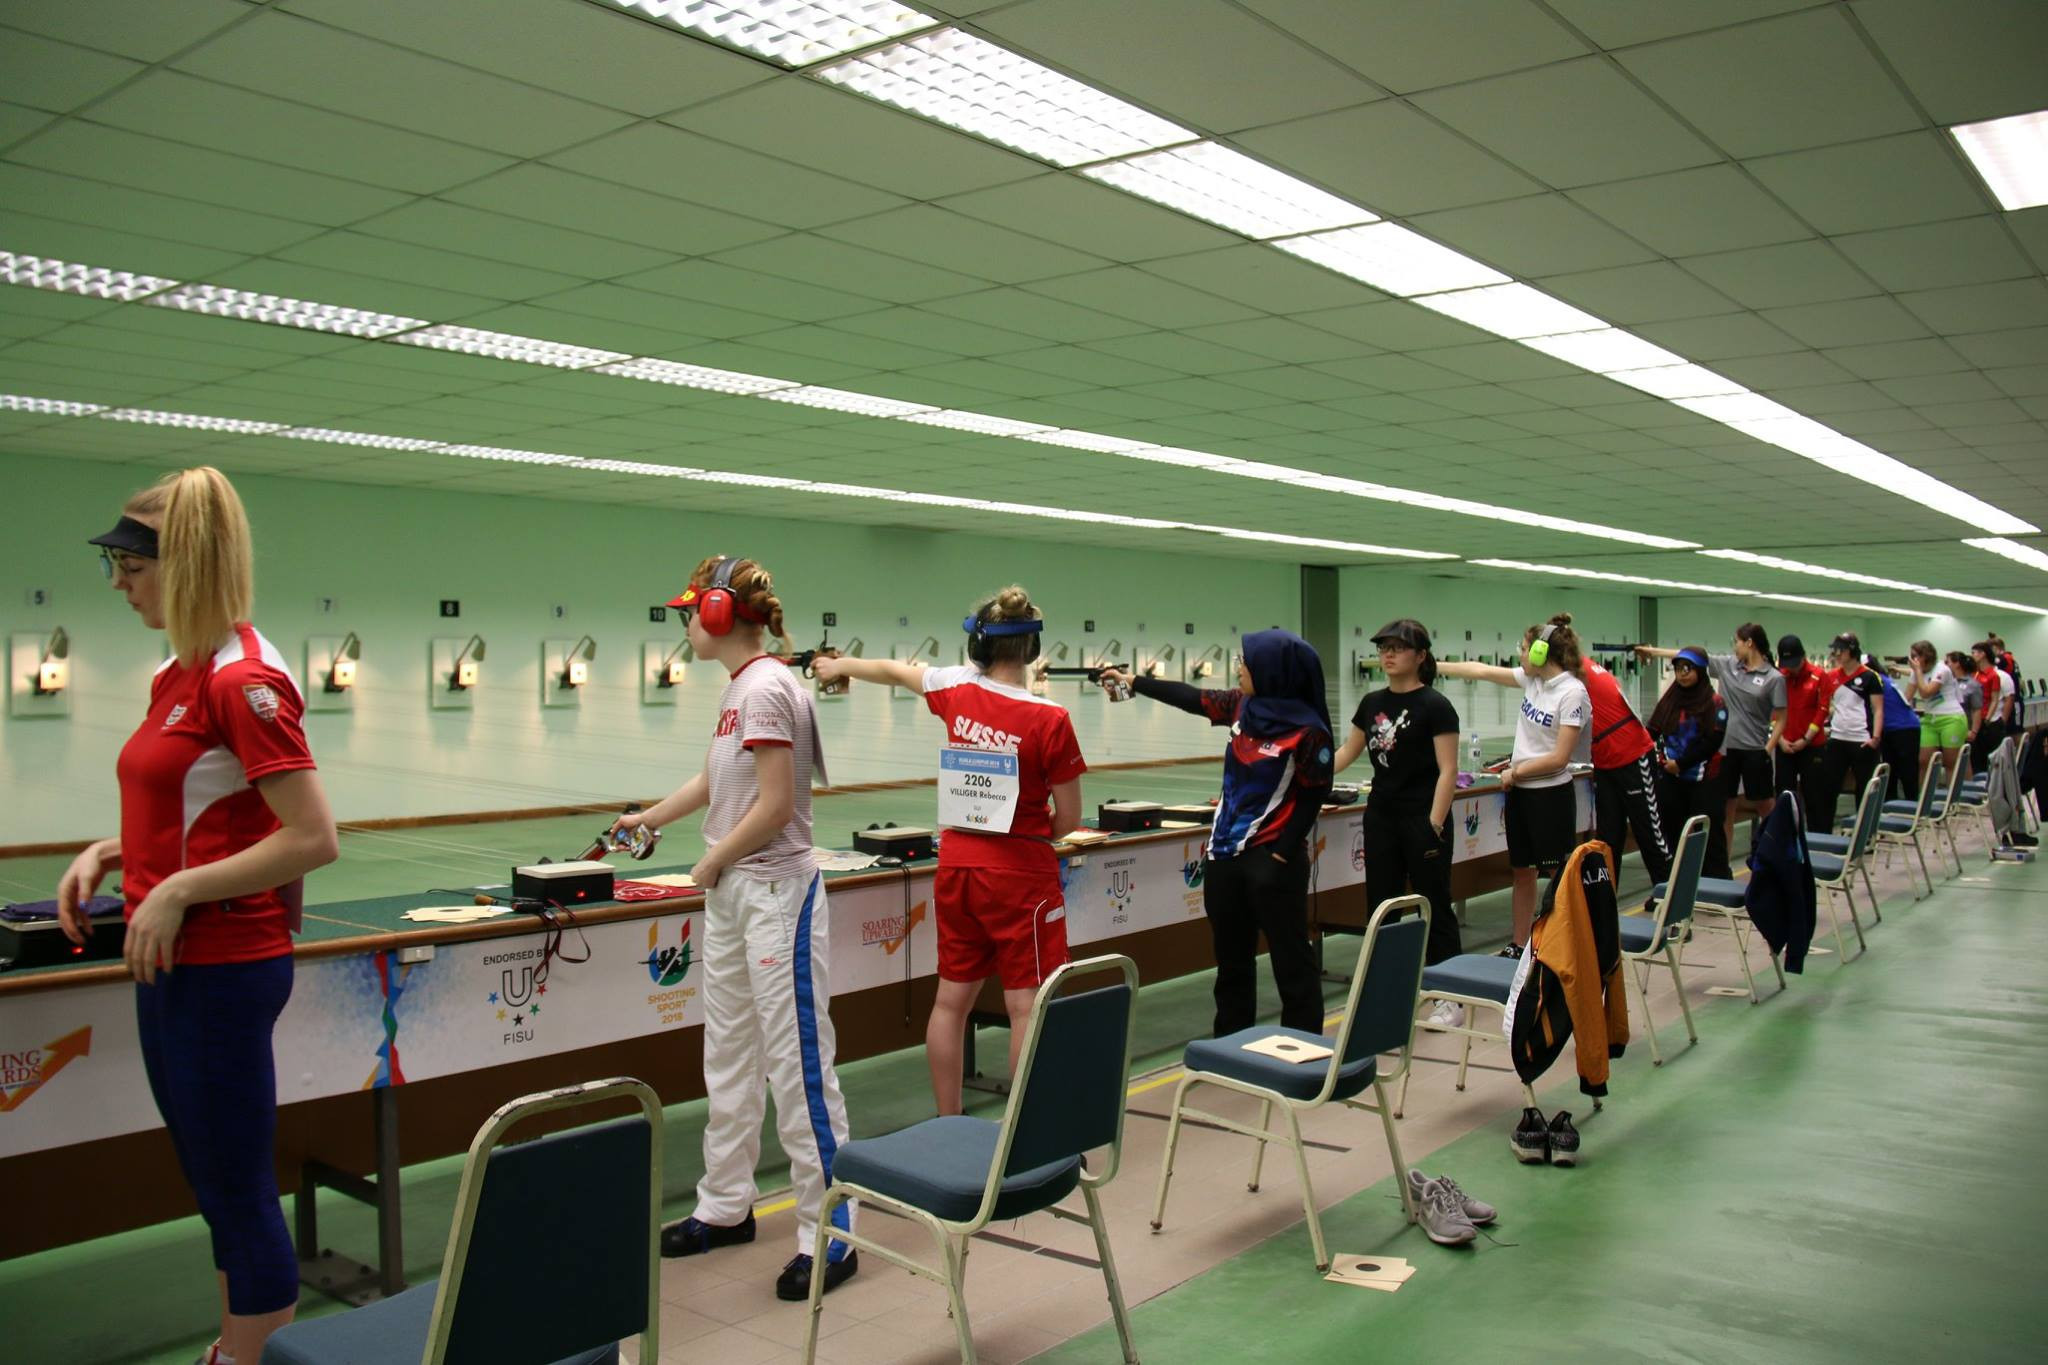 A day of competition in women's events took place today in Kuala Lumpur ©FISU